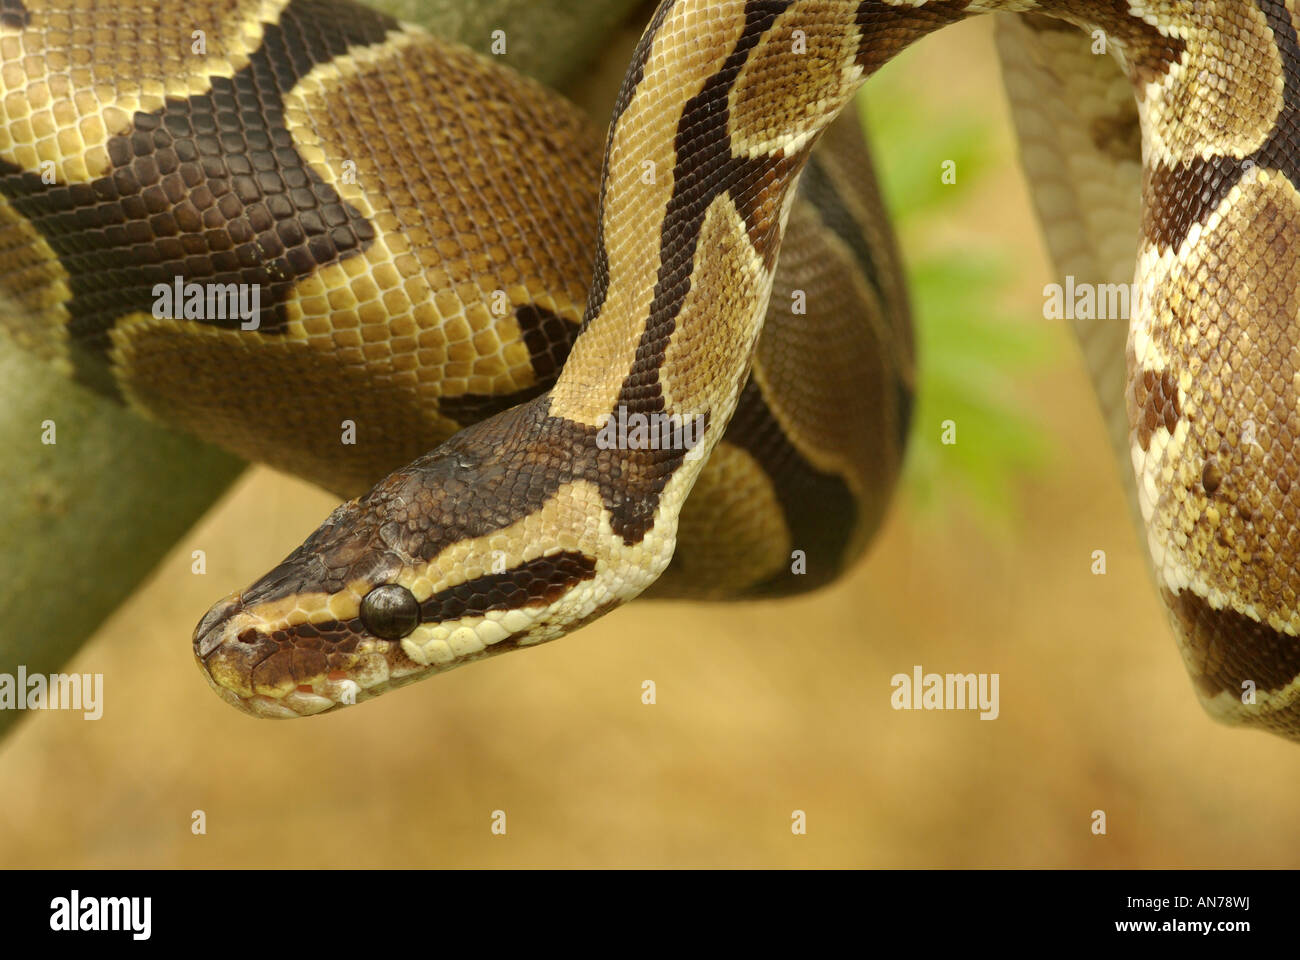 Royal python hires stock photography and images  Alamy